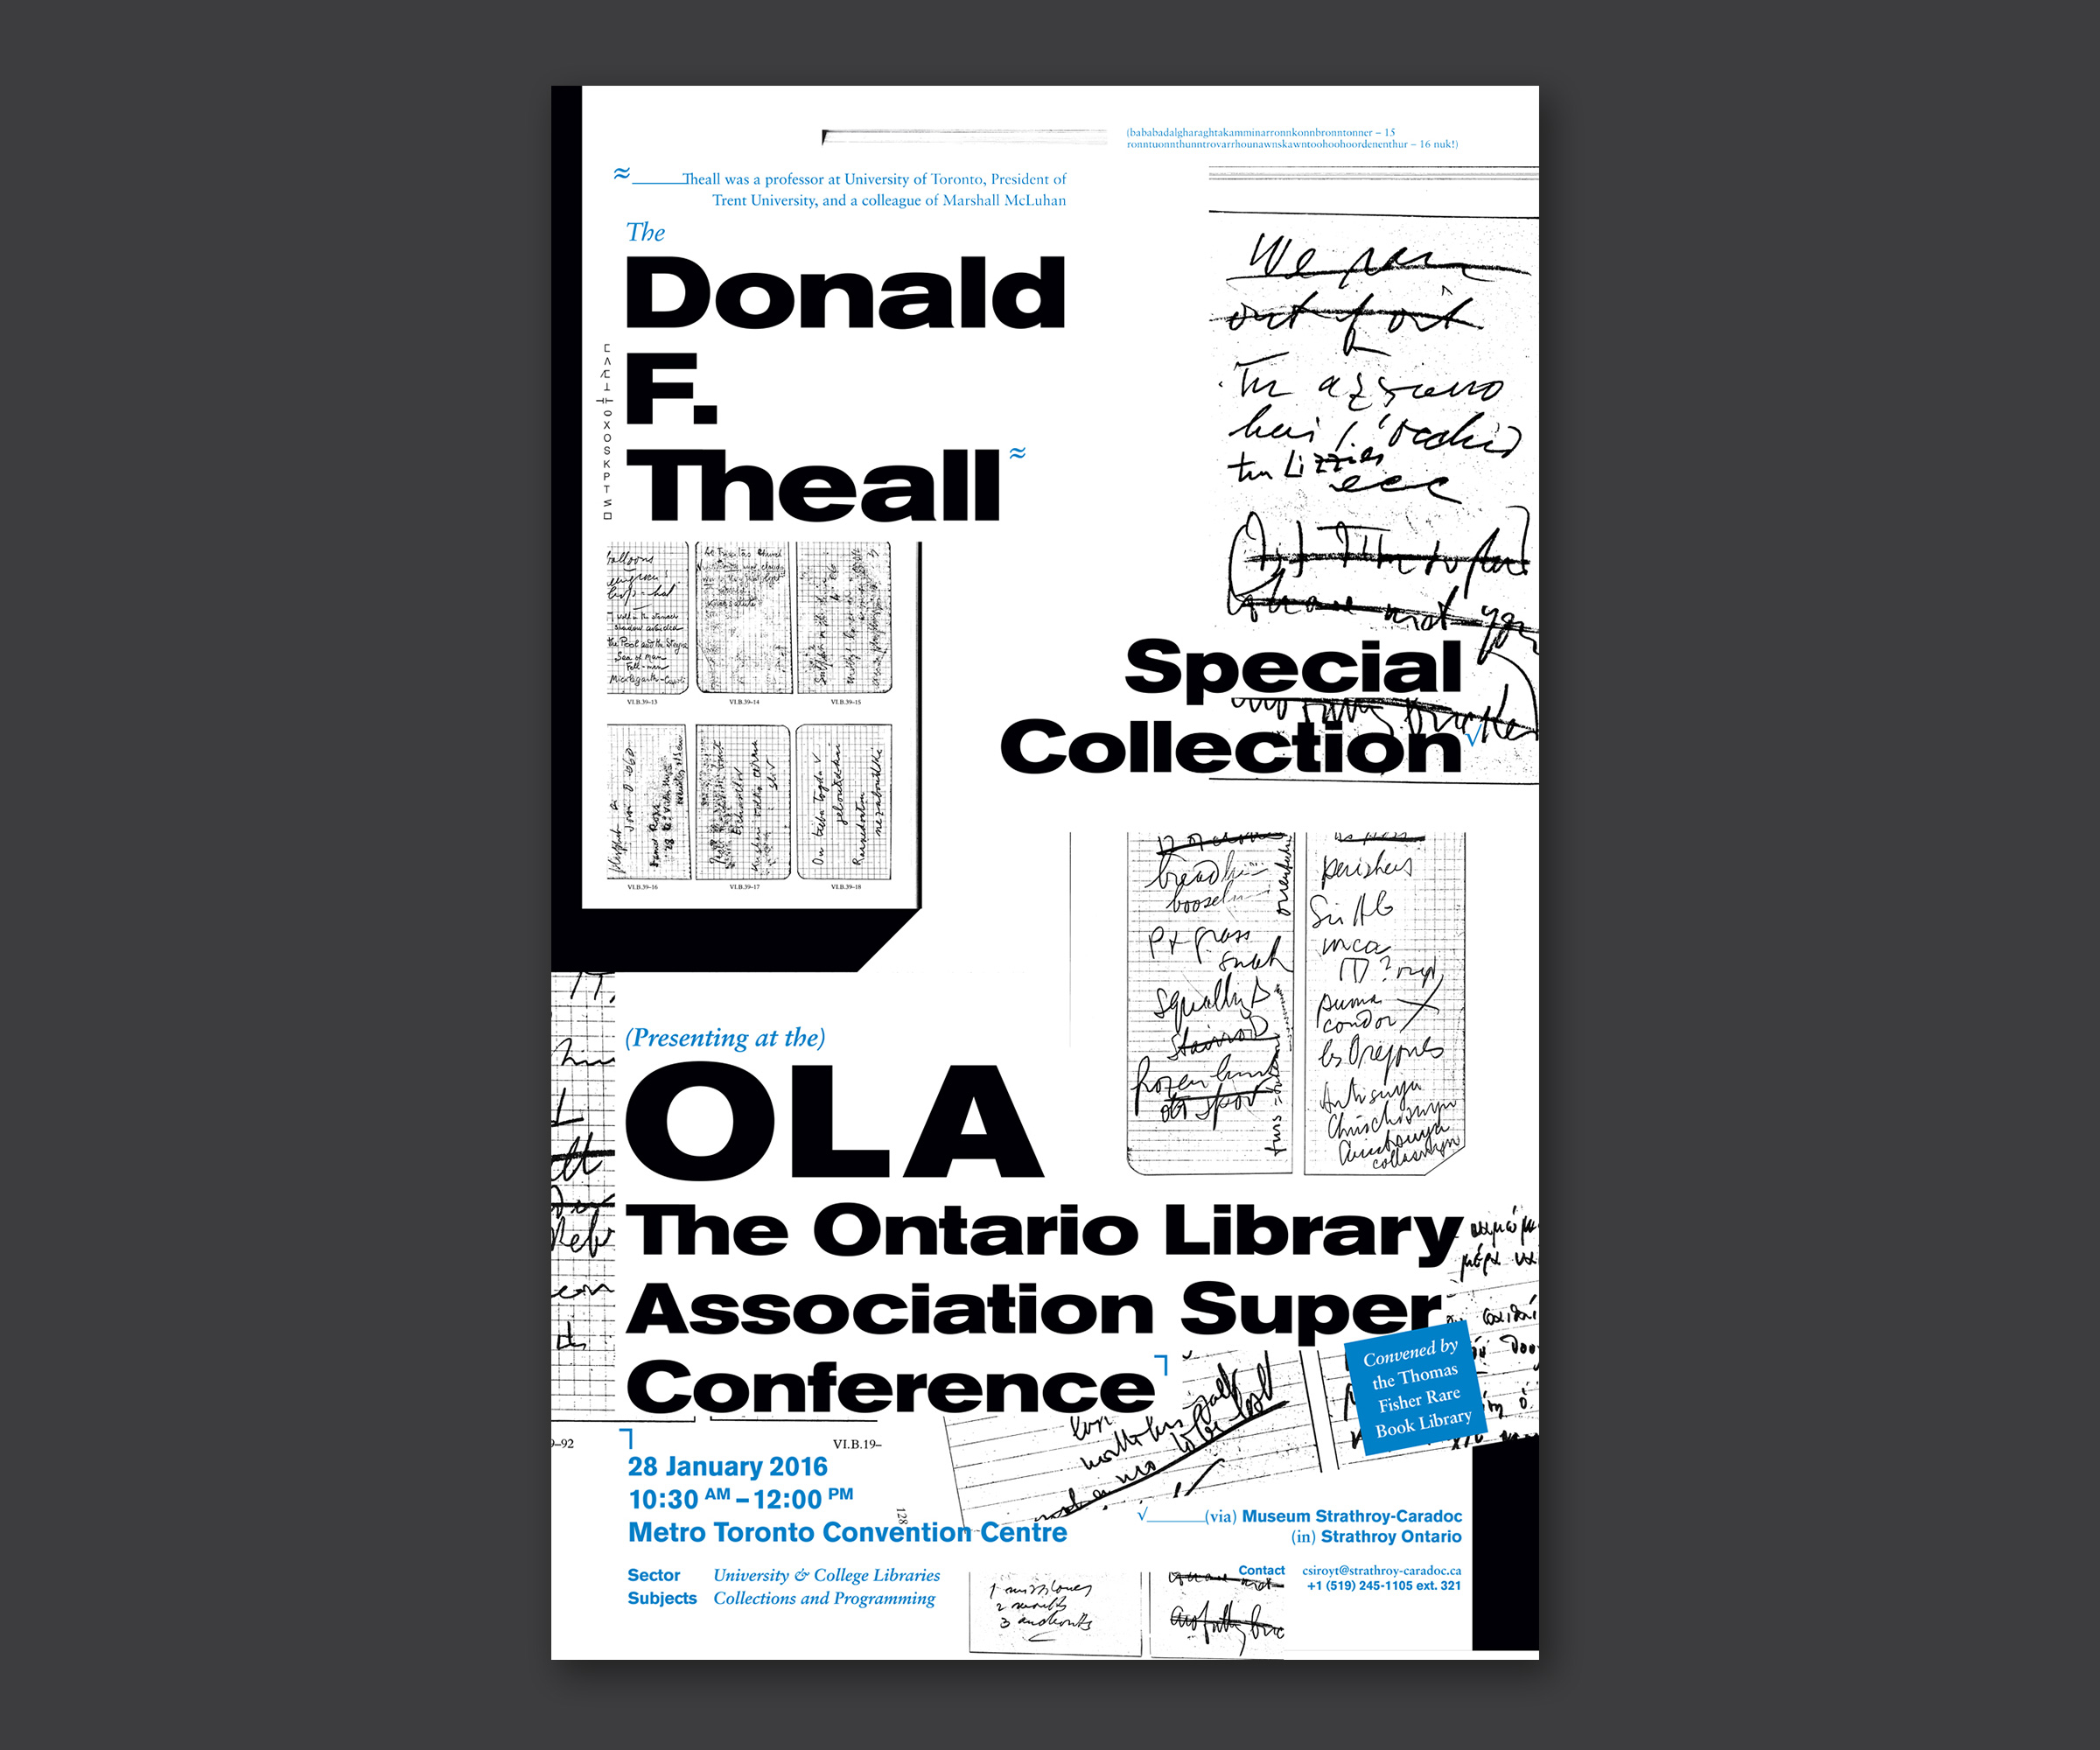 Strathroy Museum, Poster Series, Donald F. Theall Collection, 2014